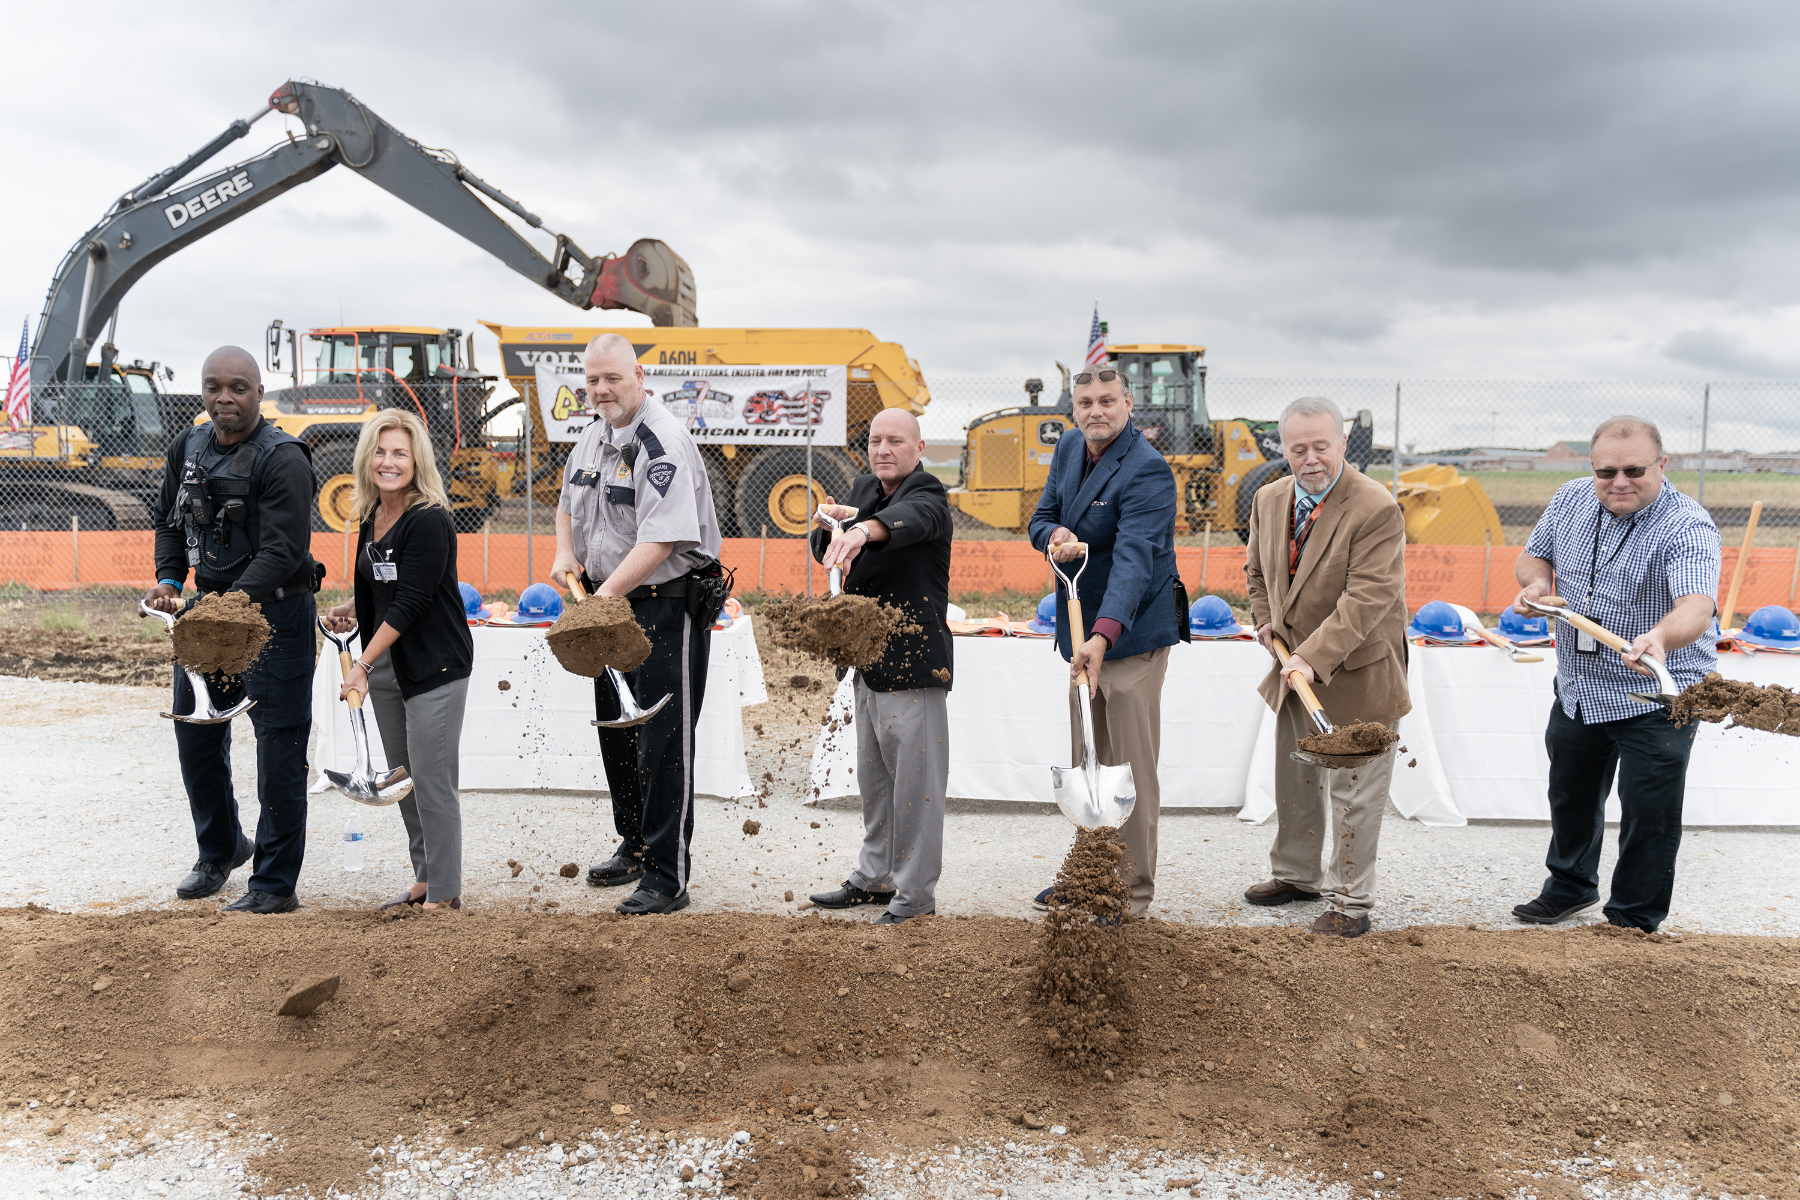 Representatives from the Westville Correctional Facility toss a shovel full of dirt on Thursday, Sep. 28, 2023 during the groundbreaking ceremony for the new $1.2 Billion correctional facility under construction in Westville, Indiana. SCOTT ROBERSON | Indiana Department of Correction